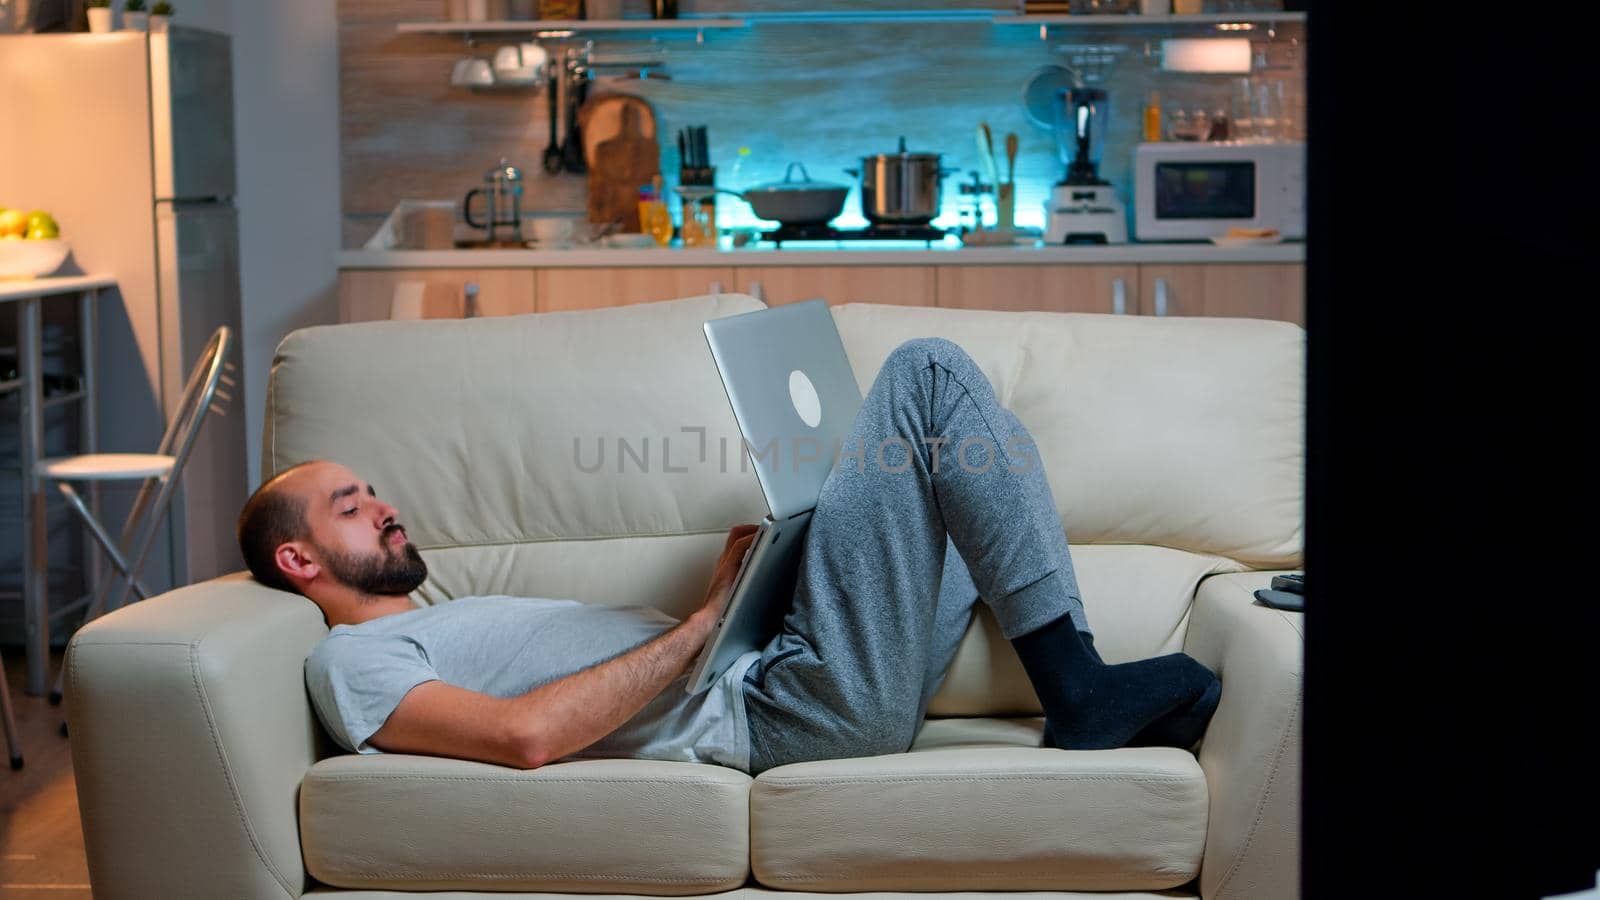 Exhausted man falling asleep while working on internet communication project by DCStudio